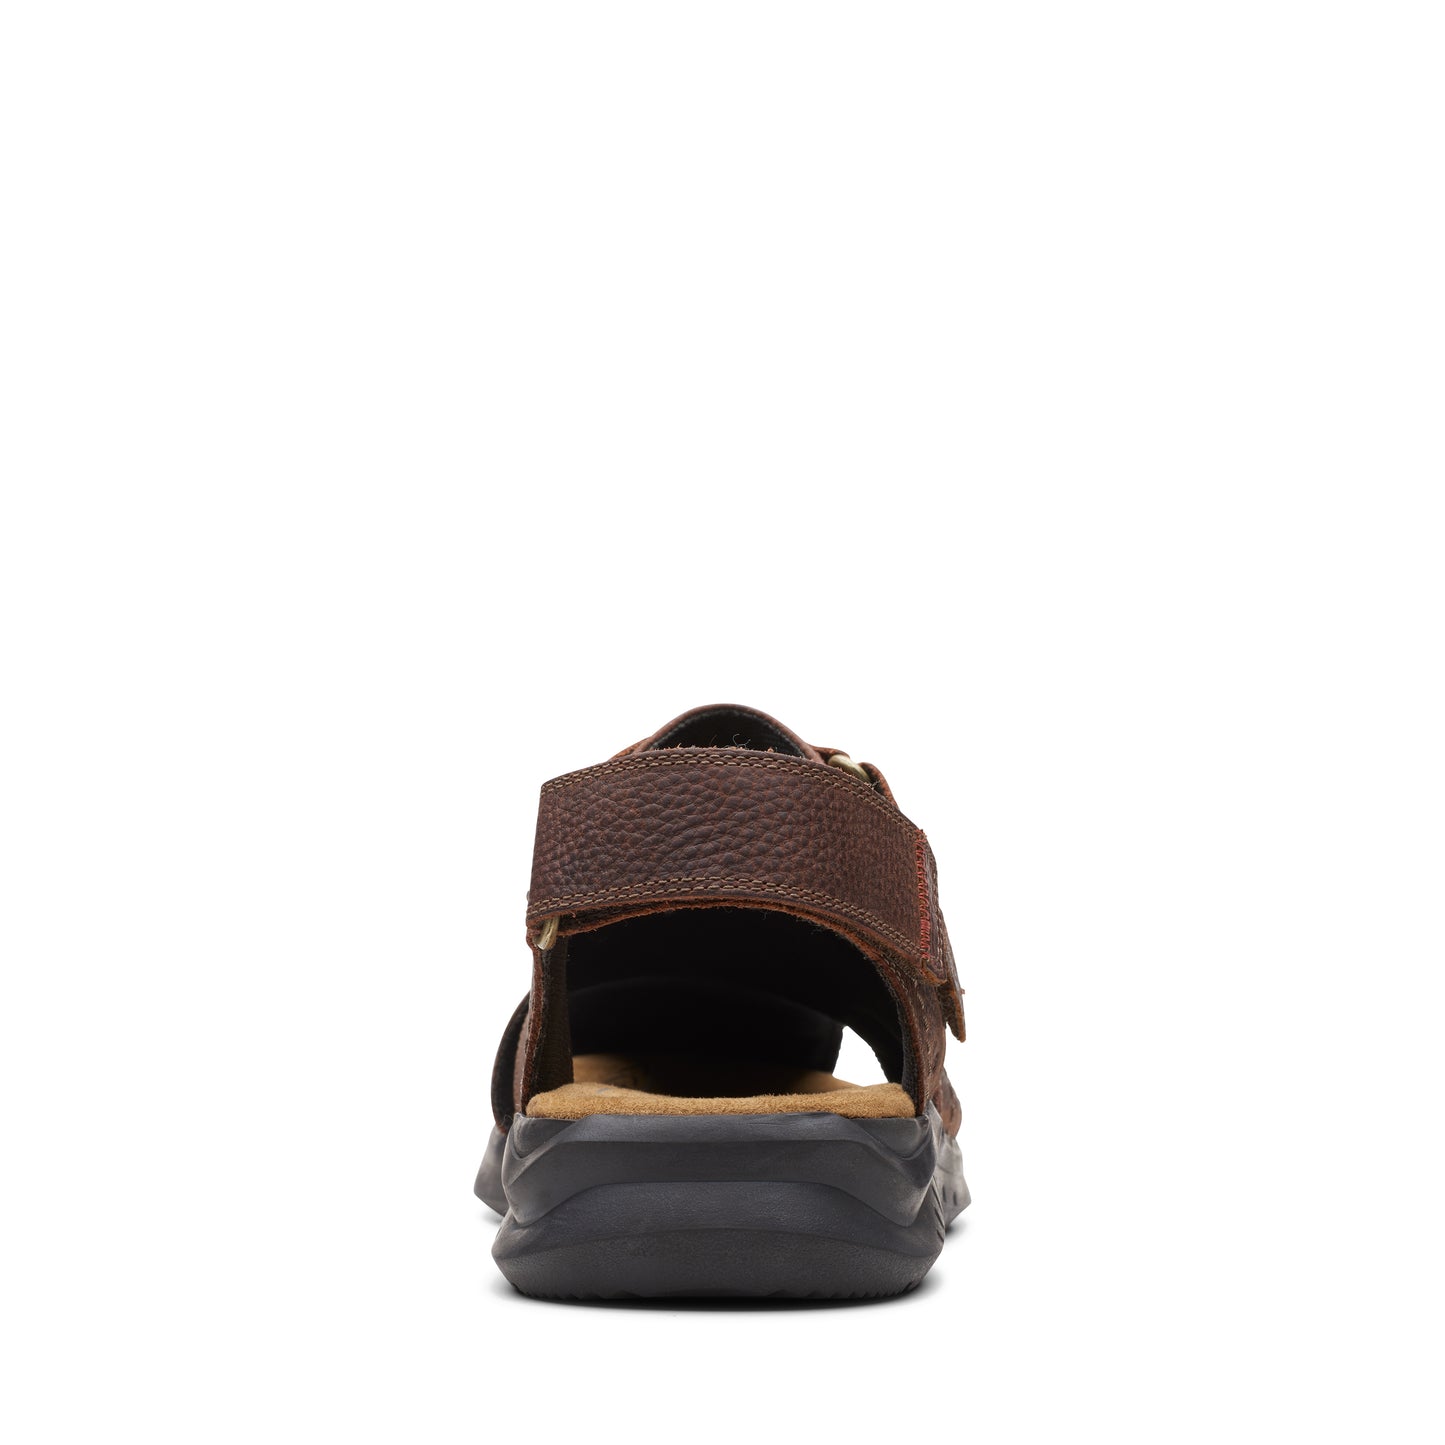 Clarks Men's Hapsford Cove - Brown